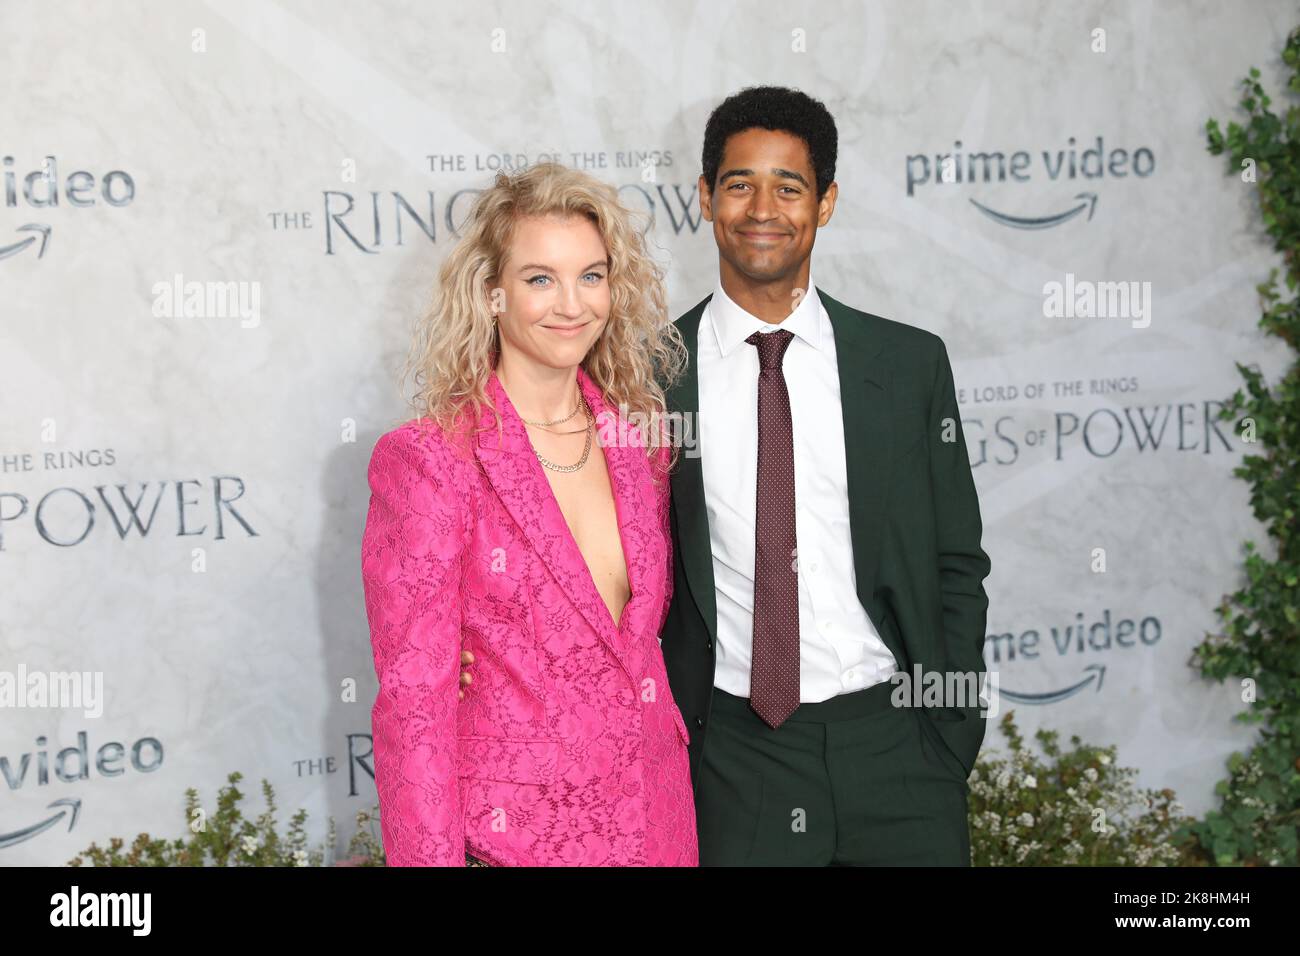 Alfred Enoch and Mona Godfrey attend the World premiere of 'The Lord Of The Rings: The Rings Of Power' in Leicester Square, London. Stock Photo